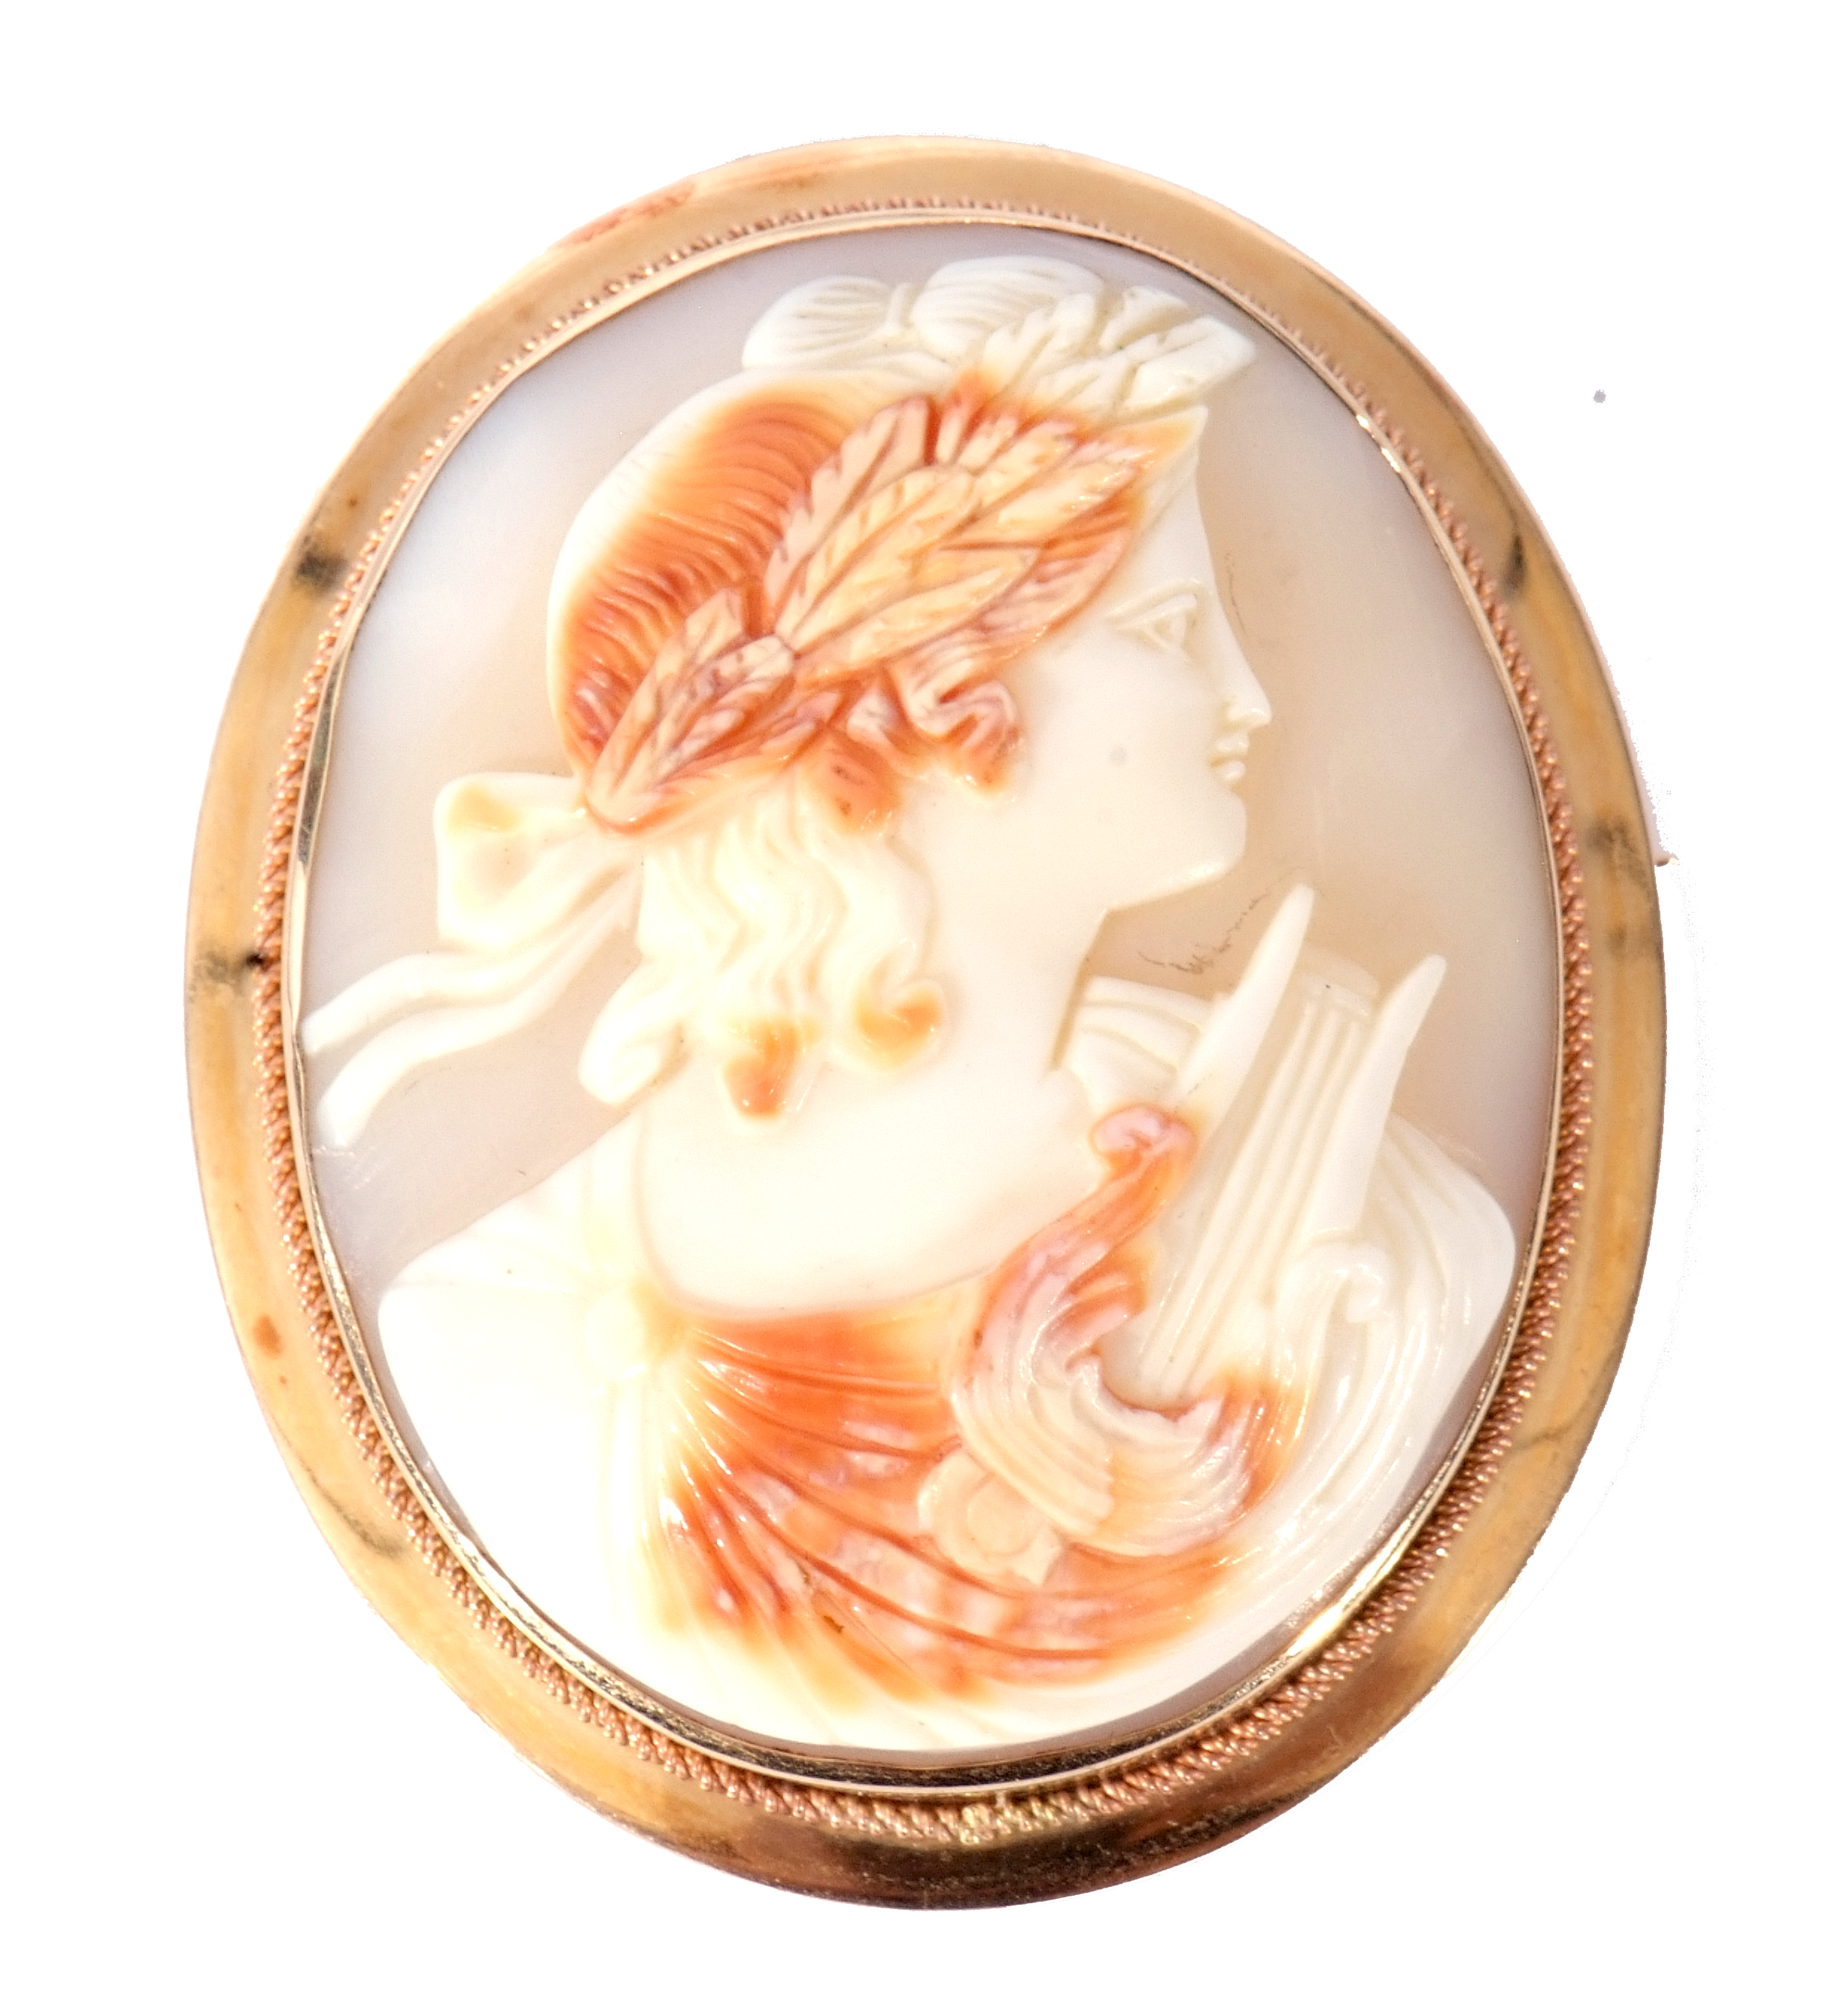 Large oval carved shell cameo depicting a Bacchanalian lady, 6 x 5cm, framed in a 14K stamped mount - Image 2 of 3